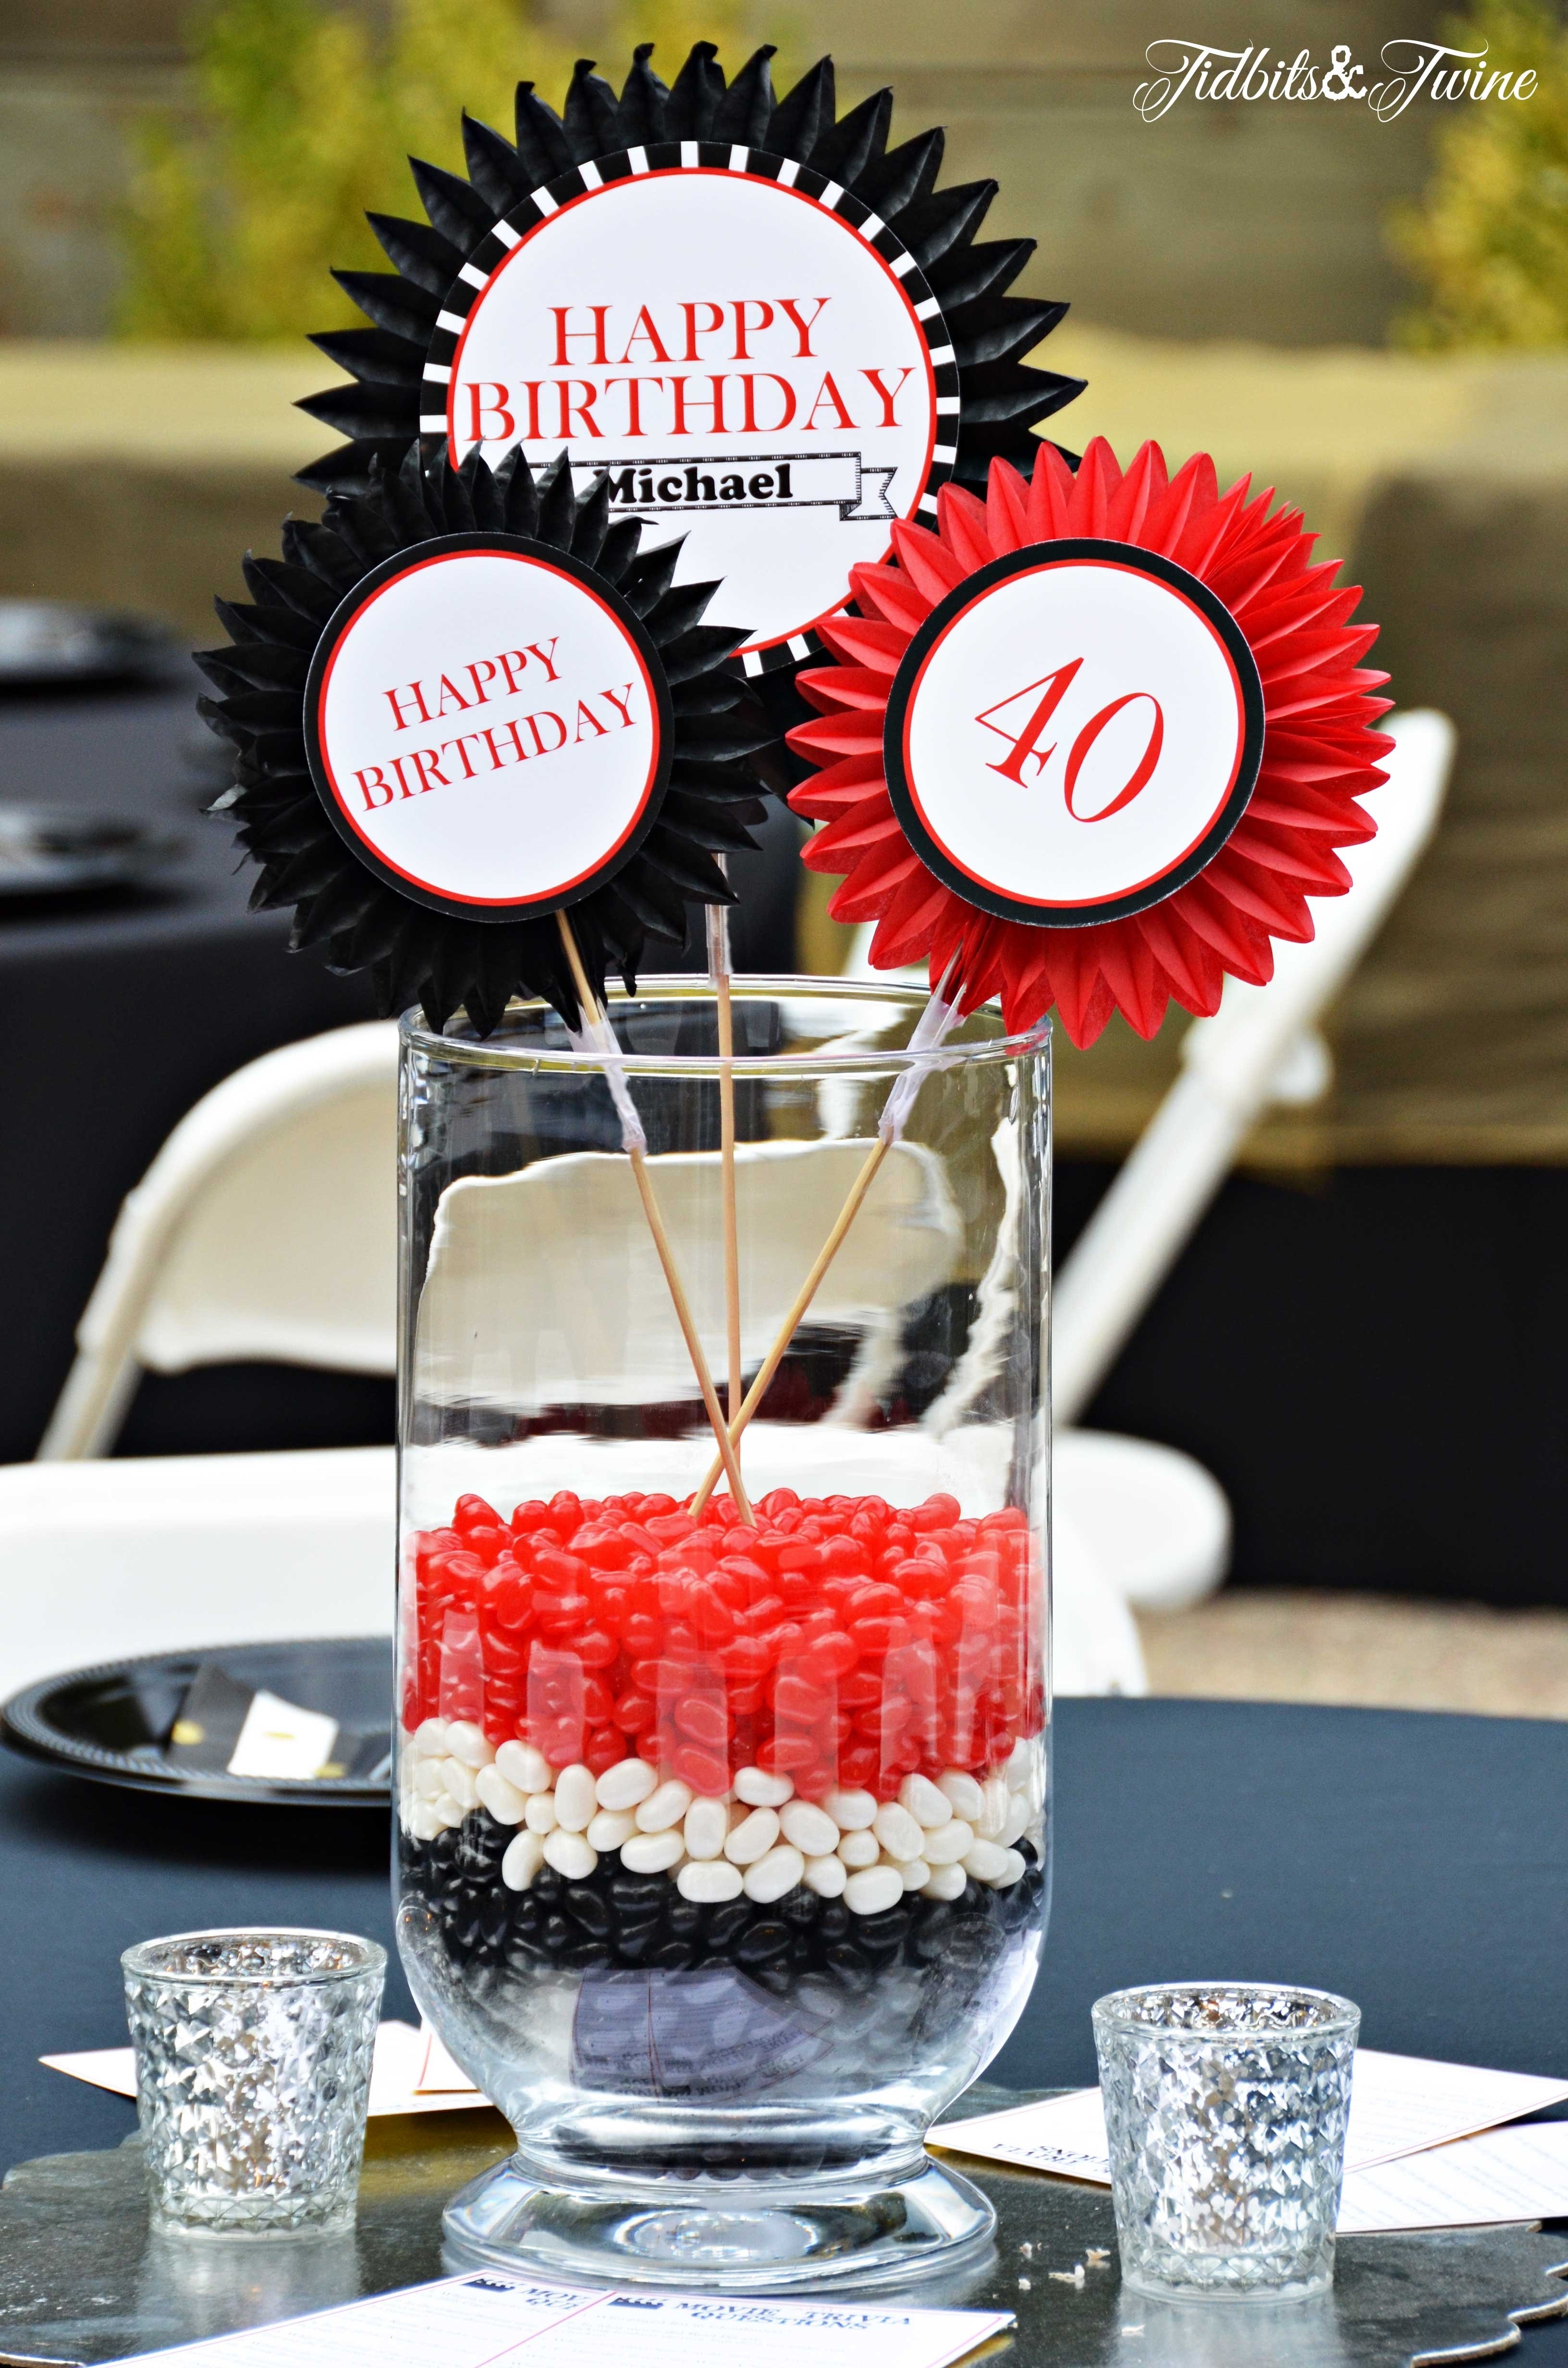 10 Wonderful 40Th Birthday Party Favors Ideas 40th birthday party tidbitstwine 2022